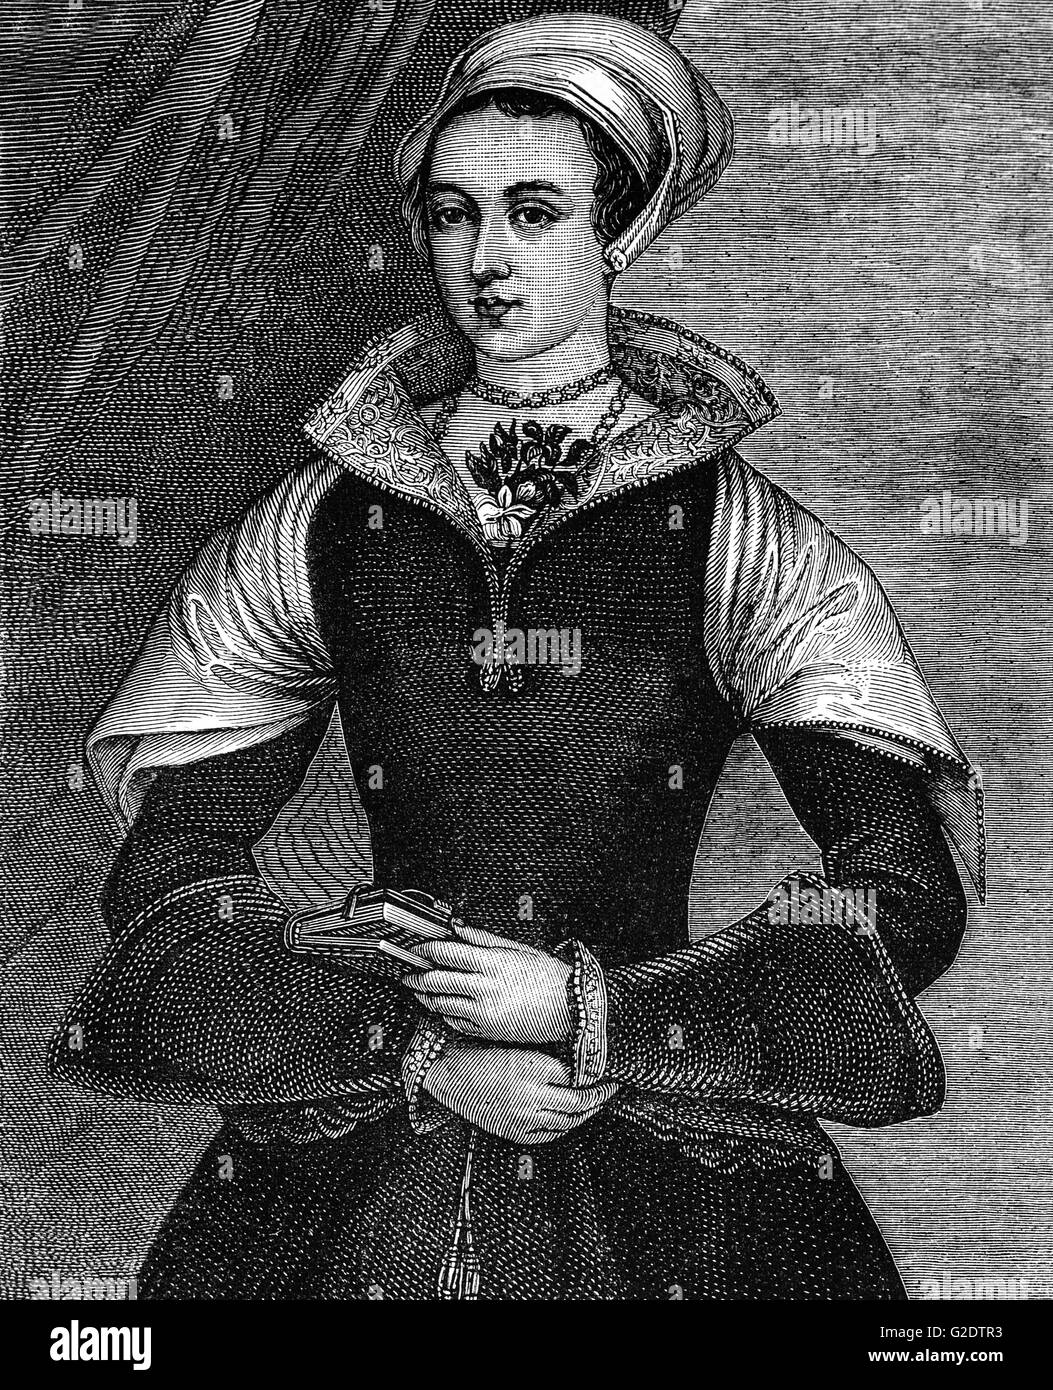 Lady Jane Grey also known as the Nine-Day Queen was an English noblewoman and de facto monarch of England and Ireland from 10 July until 19 July 1553. She was executed on 12 February 1554 Stock Photo